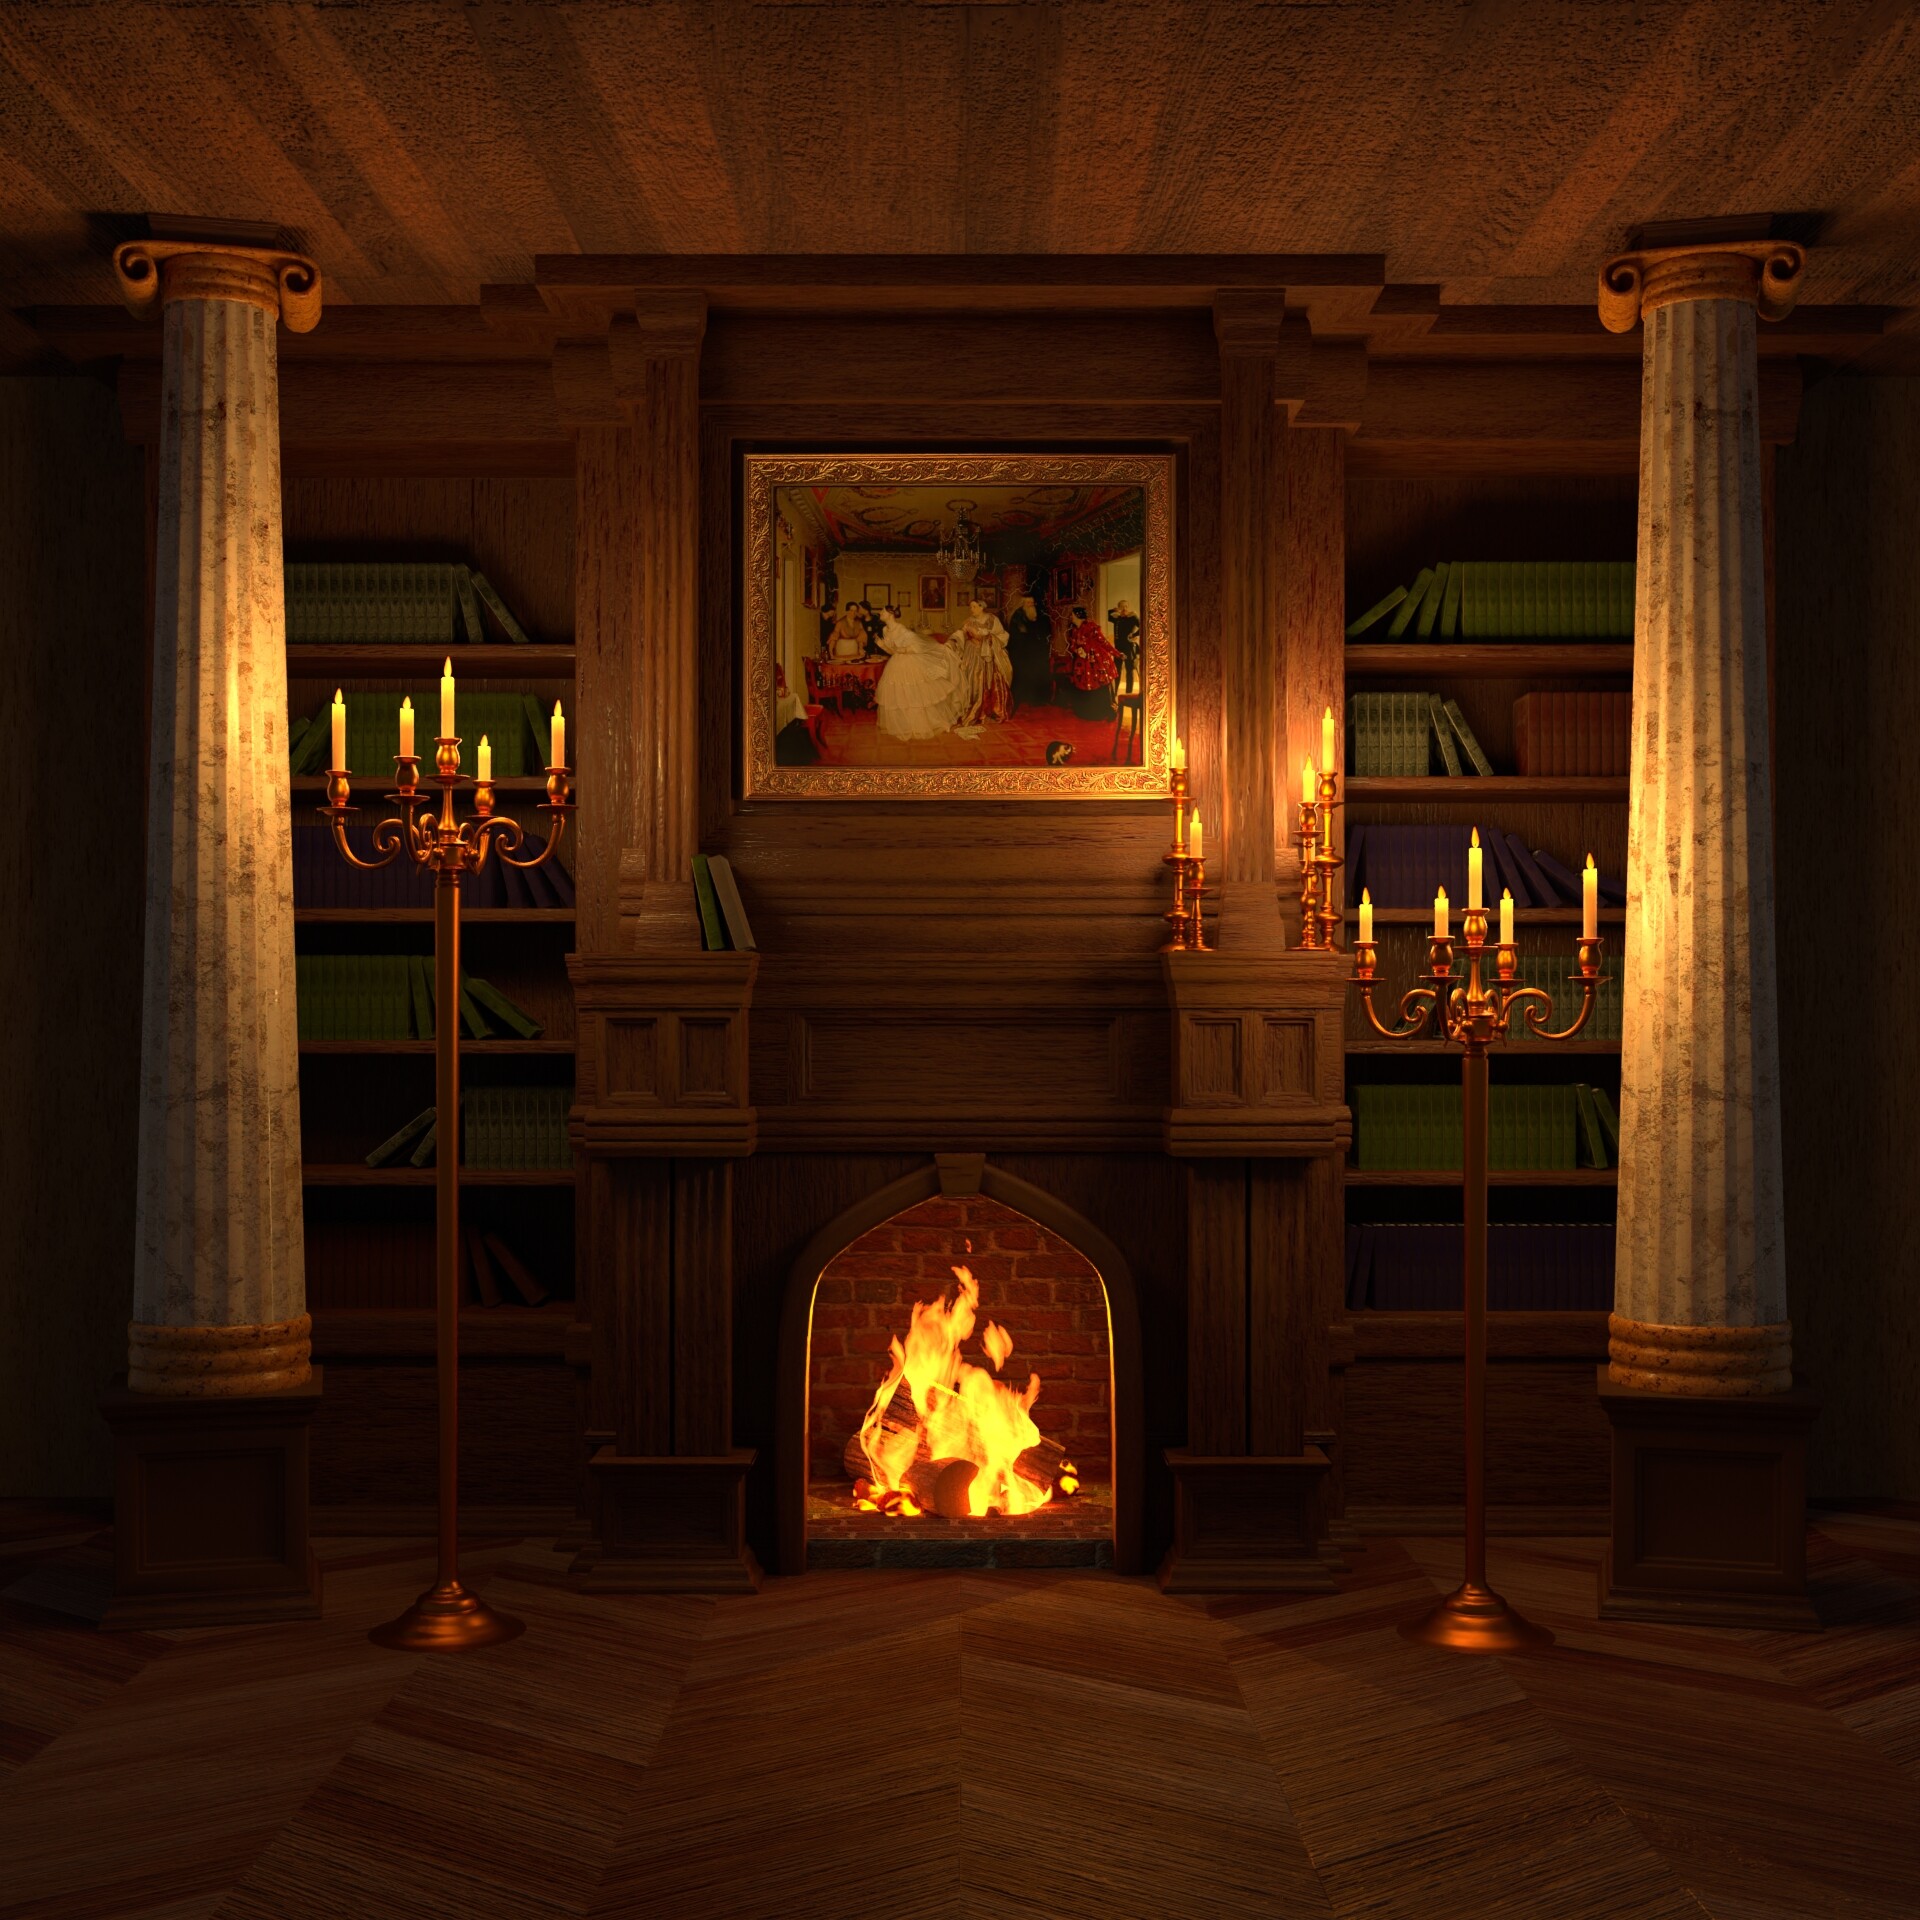 ArtStation - A fireplace of about the 19th century